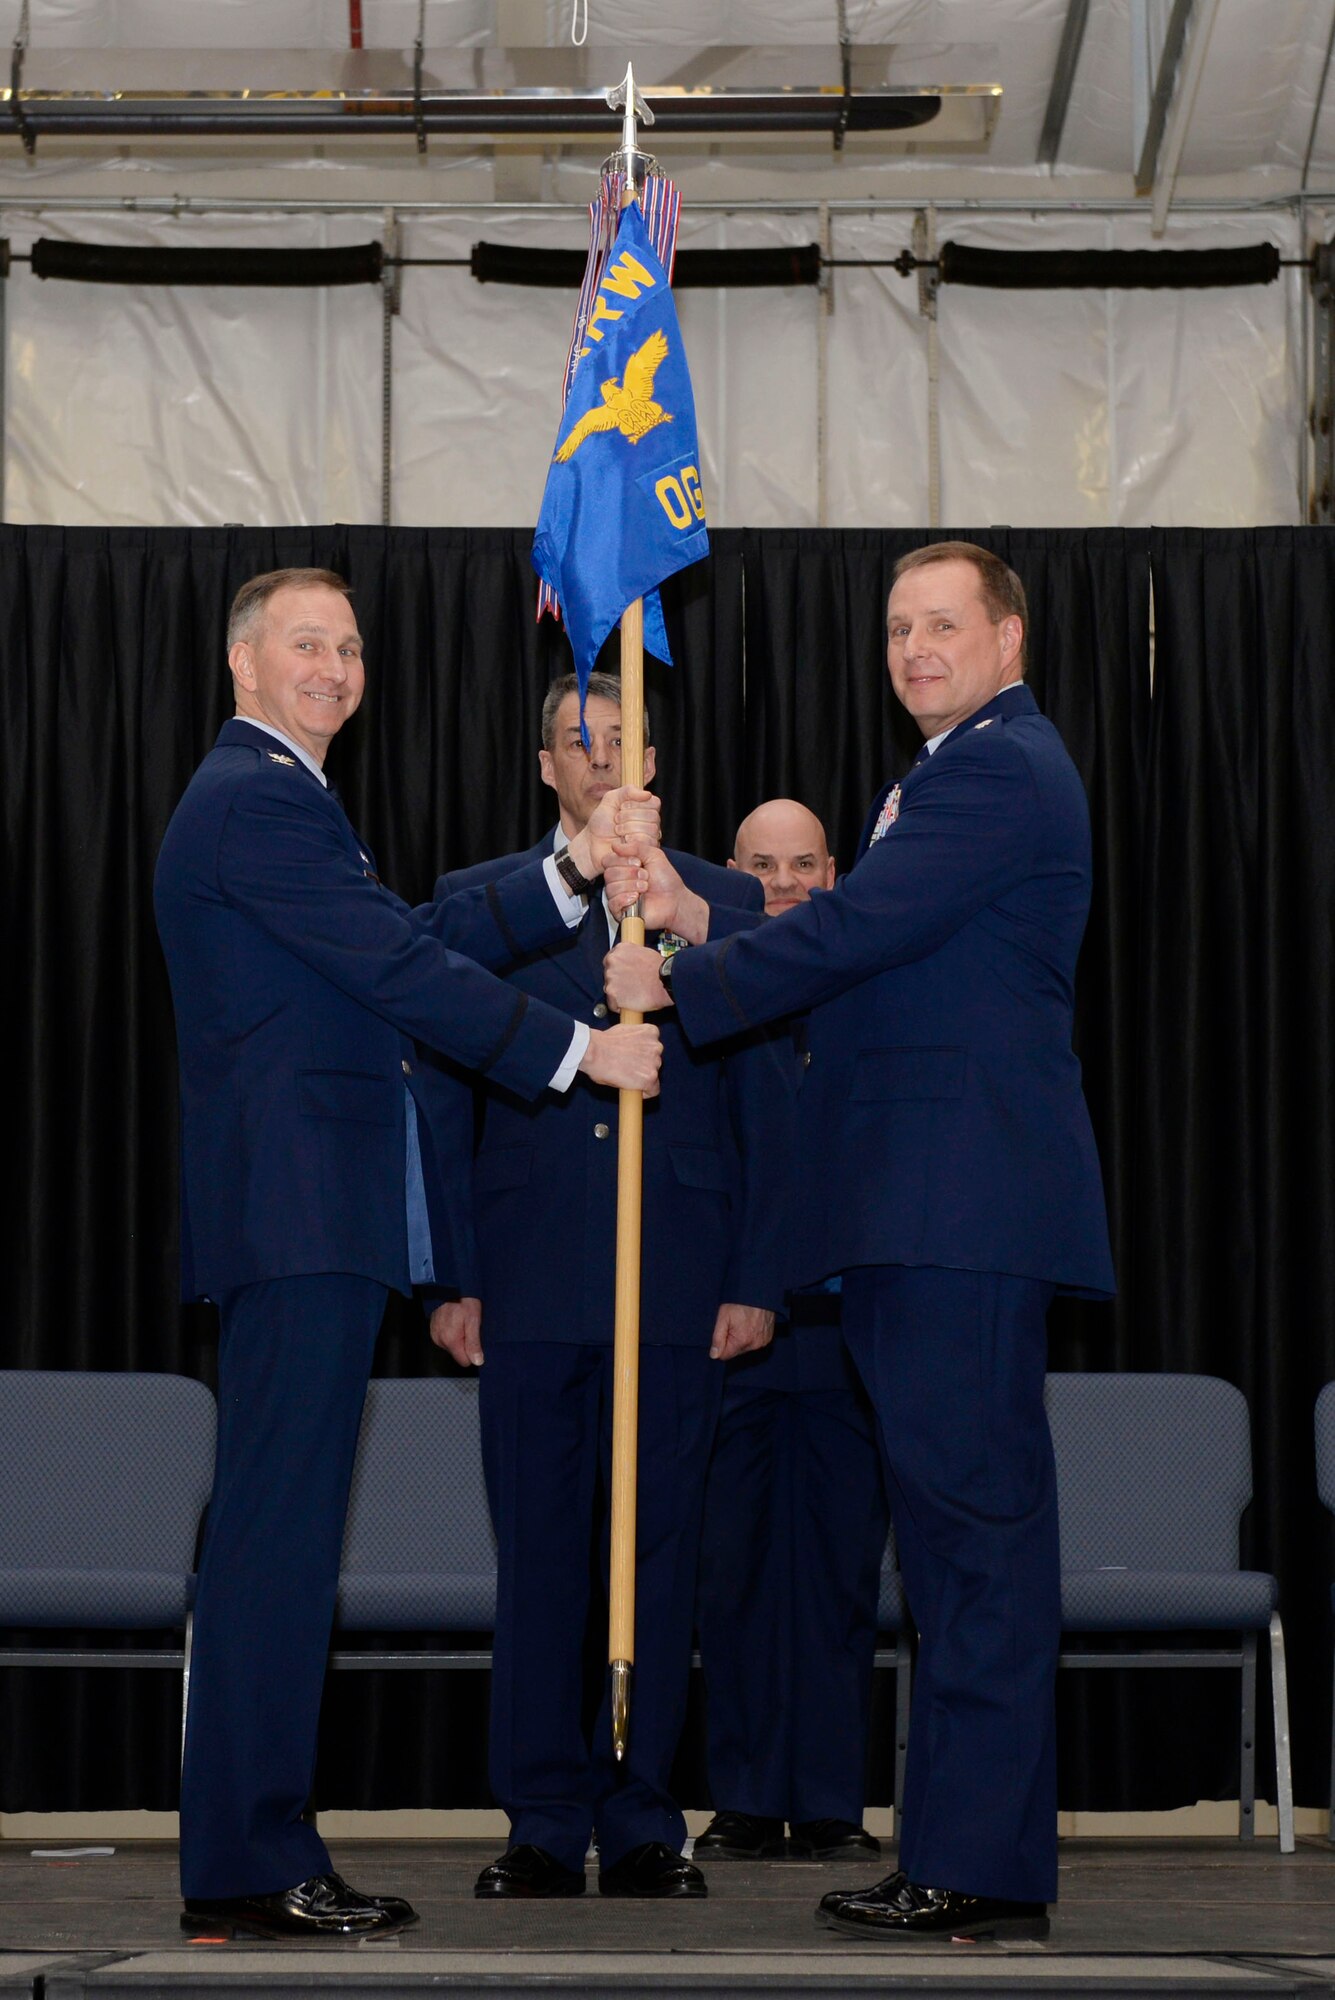 Lt. Col. Mark W. Ustaszewski (right) accepts the 157th Operations Group guidon from Col. James Ryan, commander 157th Air Refueling Wing during a change of command ceremony at Pease Air National Guard Base, N.H., March 10, 2018. The change of commmand cermony represents a formal transfer of authority and responsibility from an outgoing commander to the incoming commander.(N.H. Air National Guard photo by Senior Airman Taylor Queen)